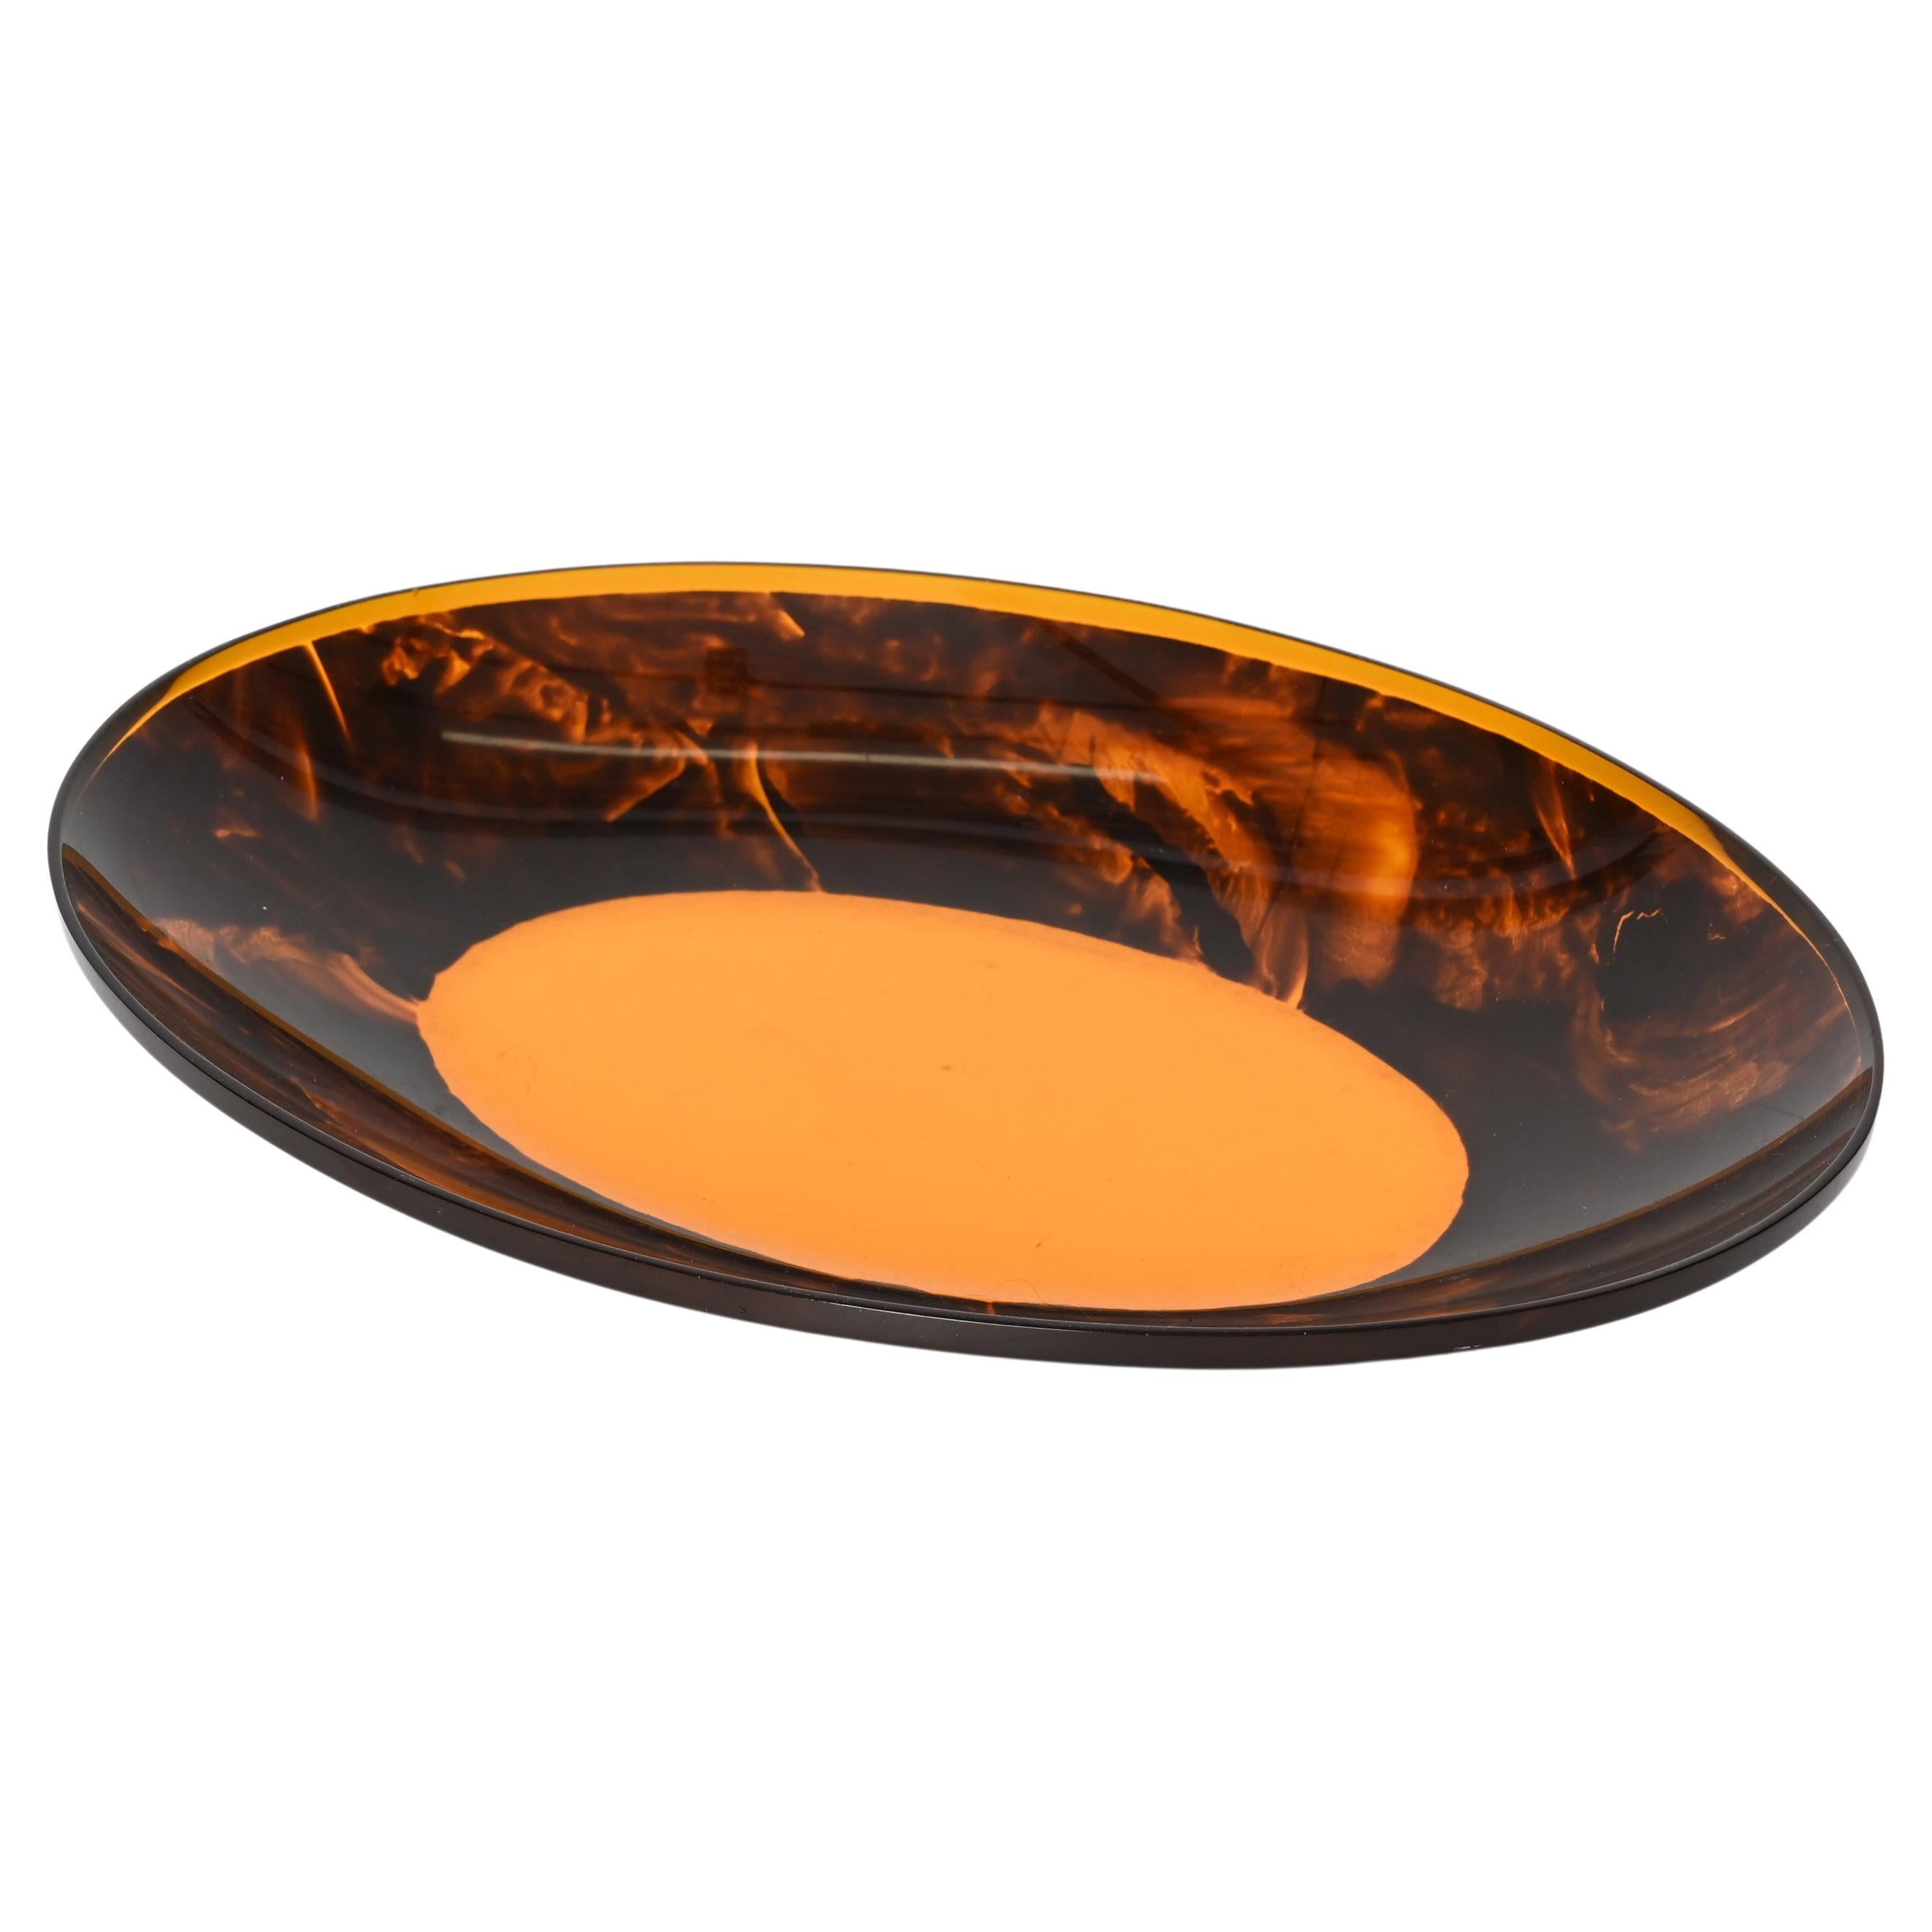 Amazing mid-century plexiglass with tortoiseshell effect oval centrepiece. This fantastic piece was designed in Italy during the 1970s in the style of Christian Dior.

This item is unique as it has a fantastic as there is magnificent because of